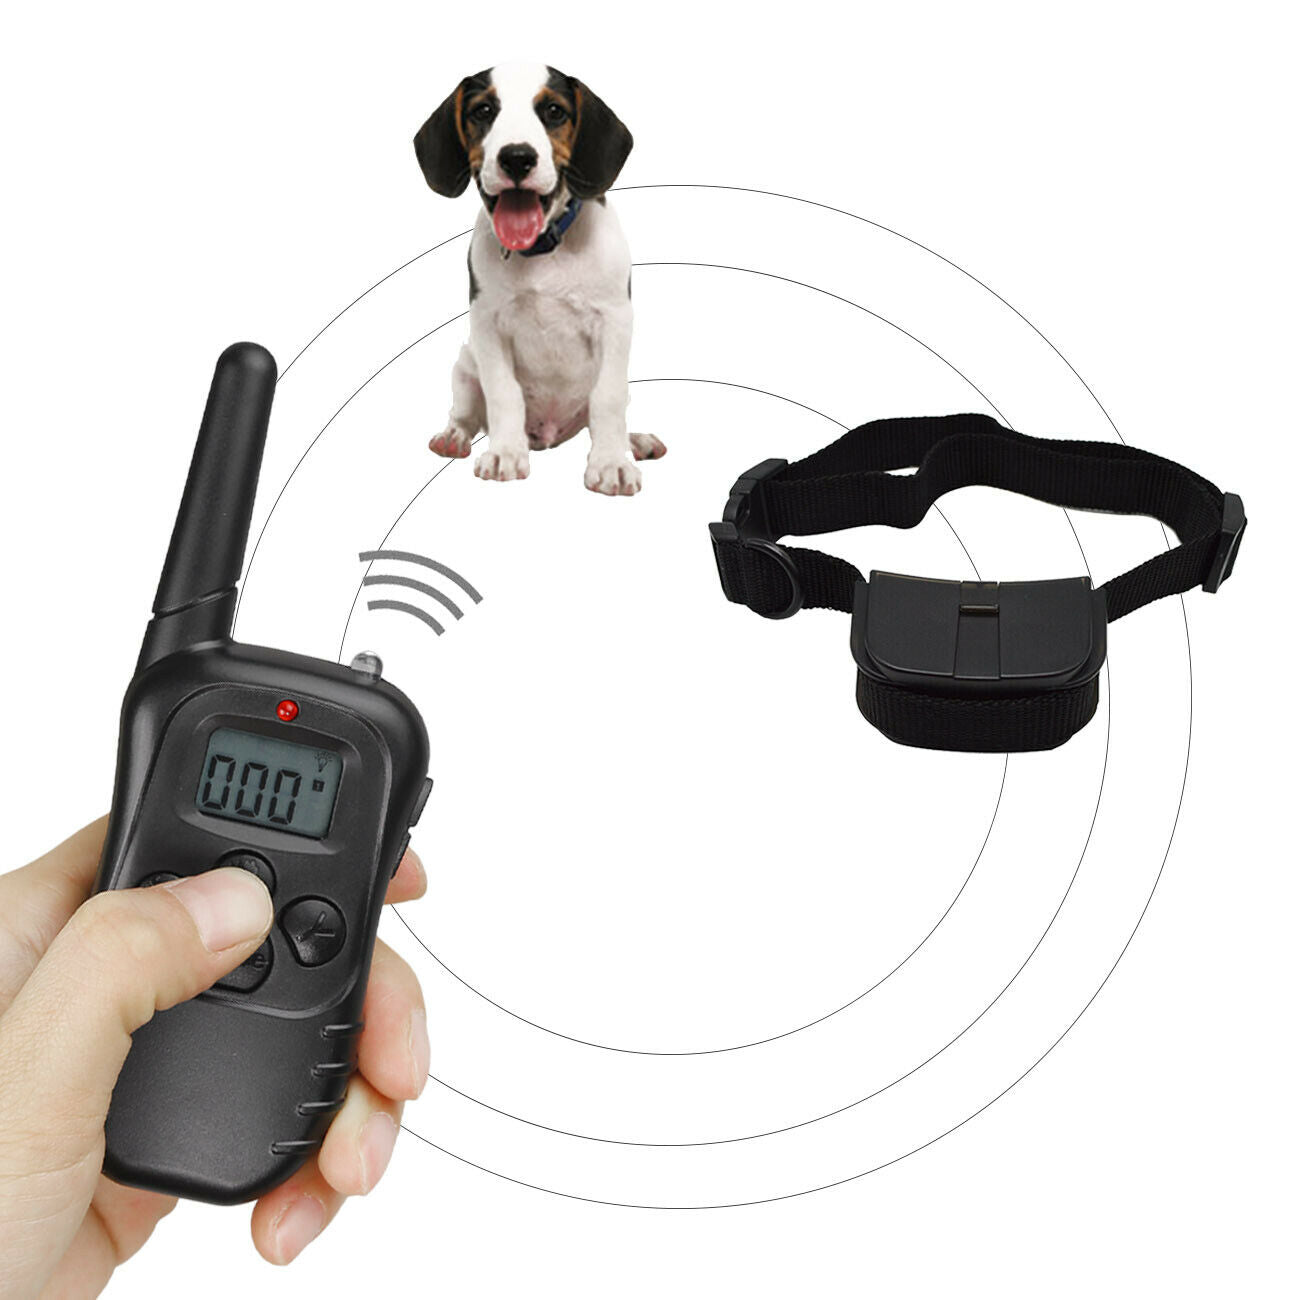 Dog Shock Collar With Remote Waterproof Electric for Large 328 Yard Pet Training